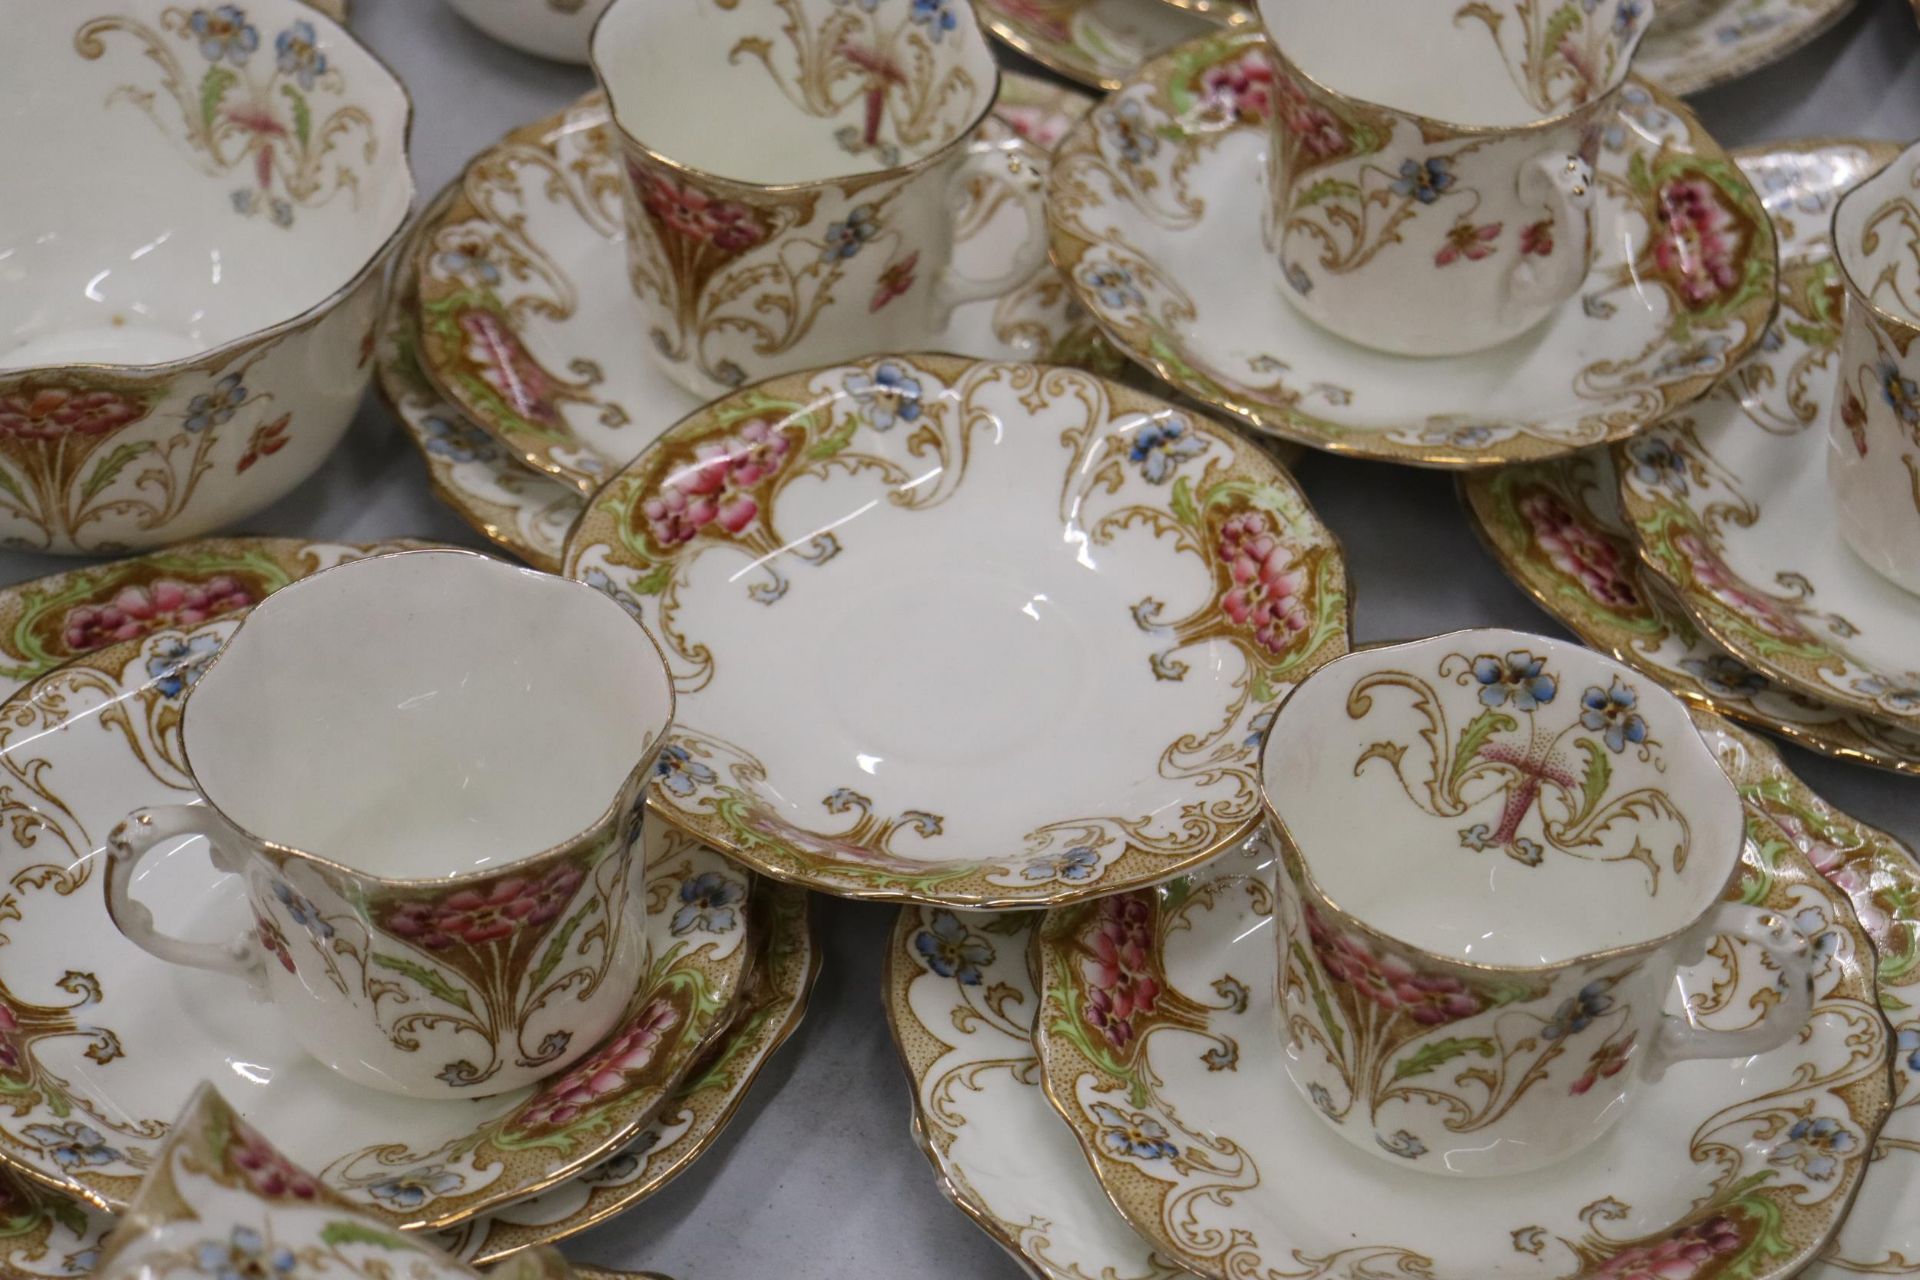 A LATE 18TH/EARLY 19TH CENTURY TEASET BY FRED B PEARCE & CO, LONDON, TO INCLUDE CAKE PLATES, A CREAM - Image 10 of 10